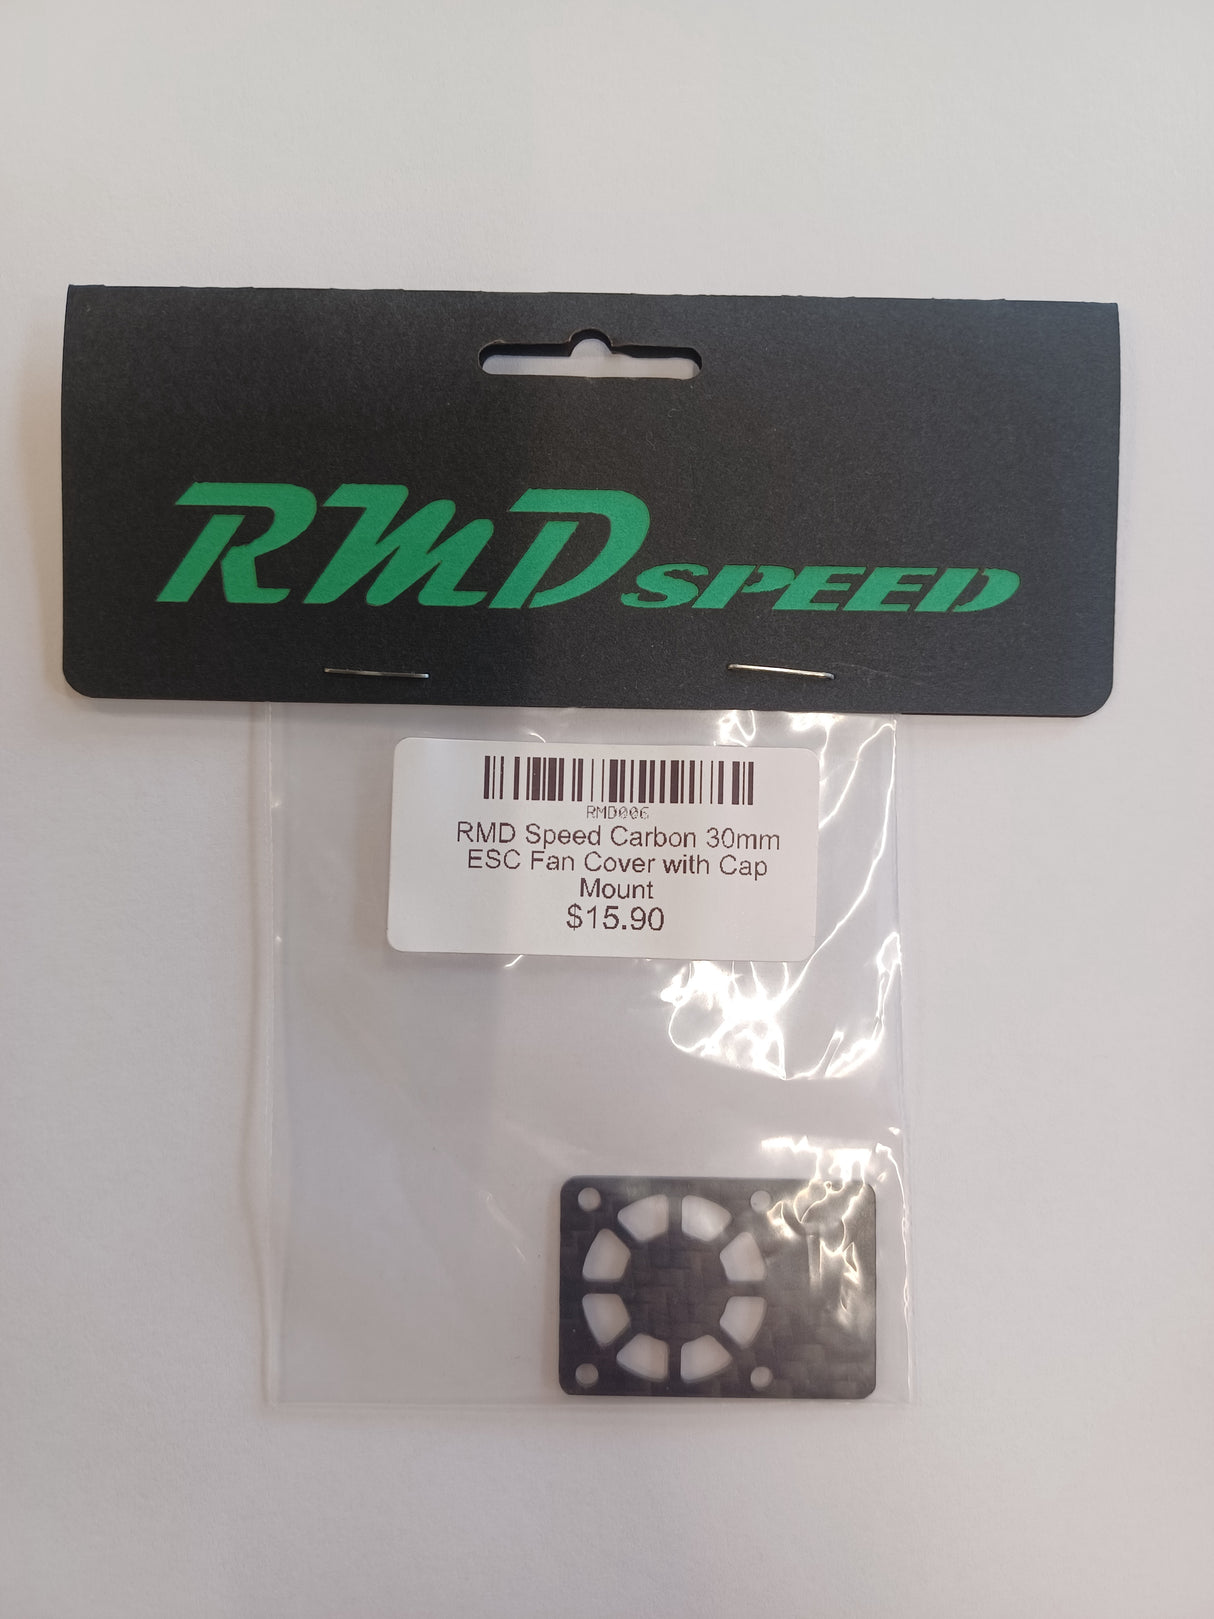 RMD Speed Carbon 30mm ESC Fan Cover with Cap Mount